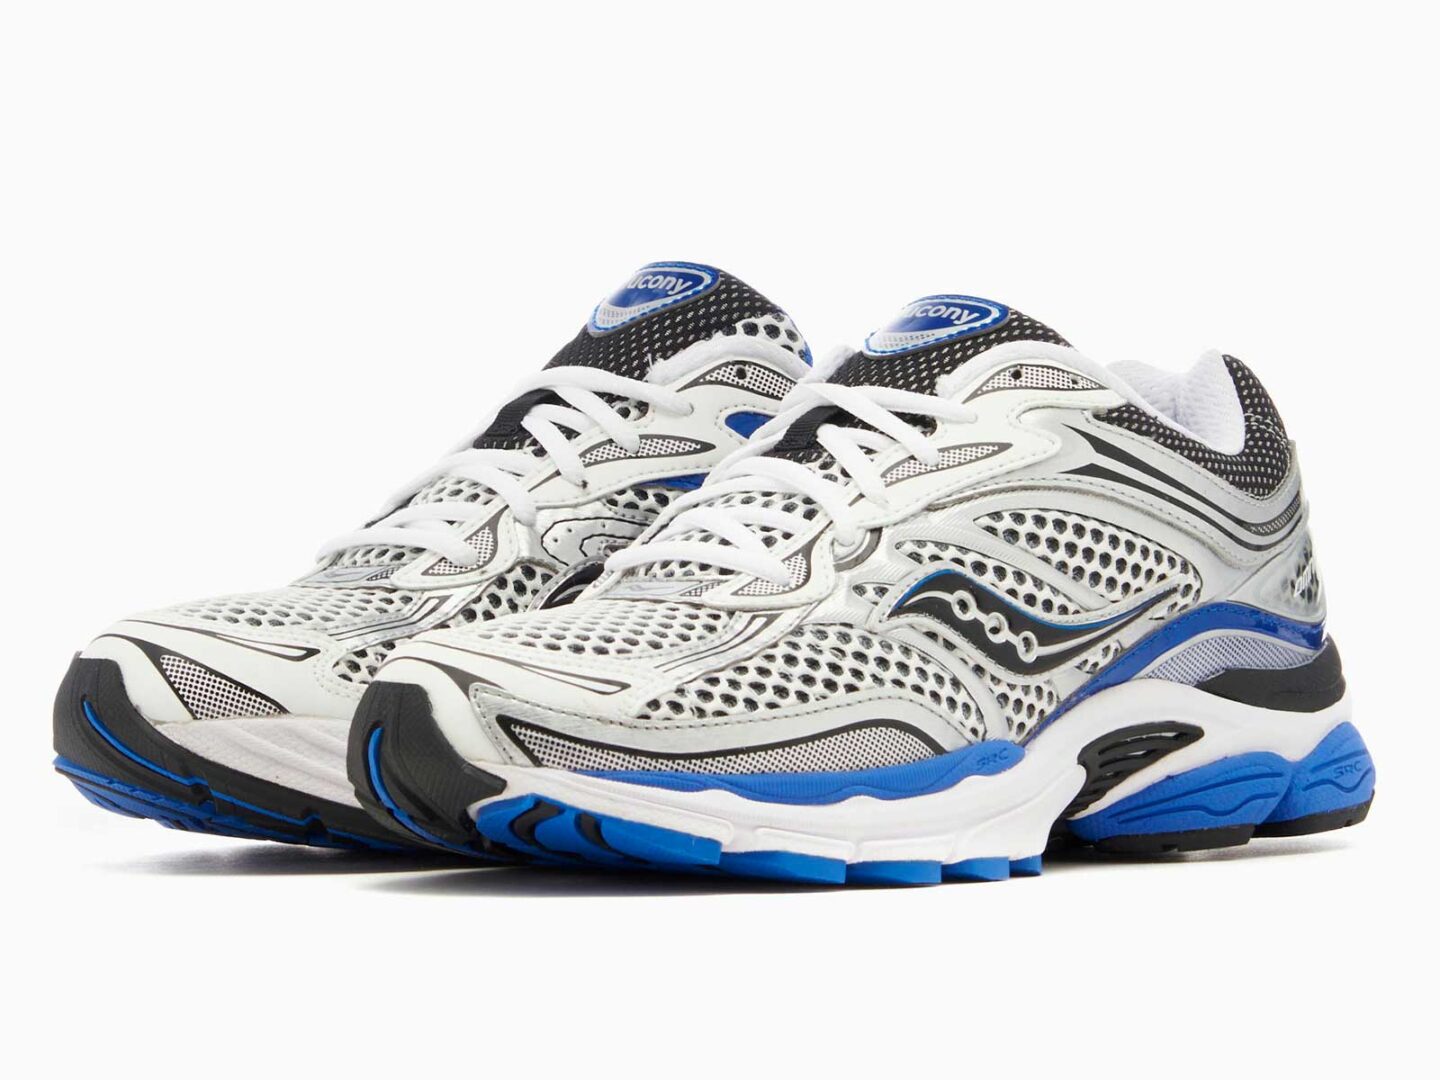 Saucony’s running shoe hype is rising